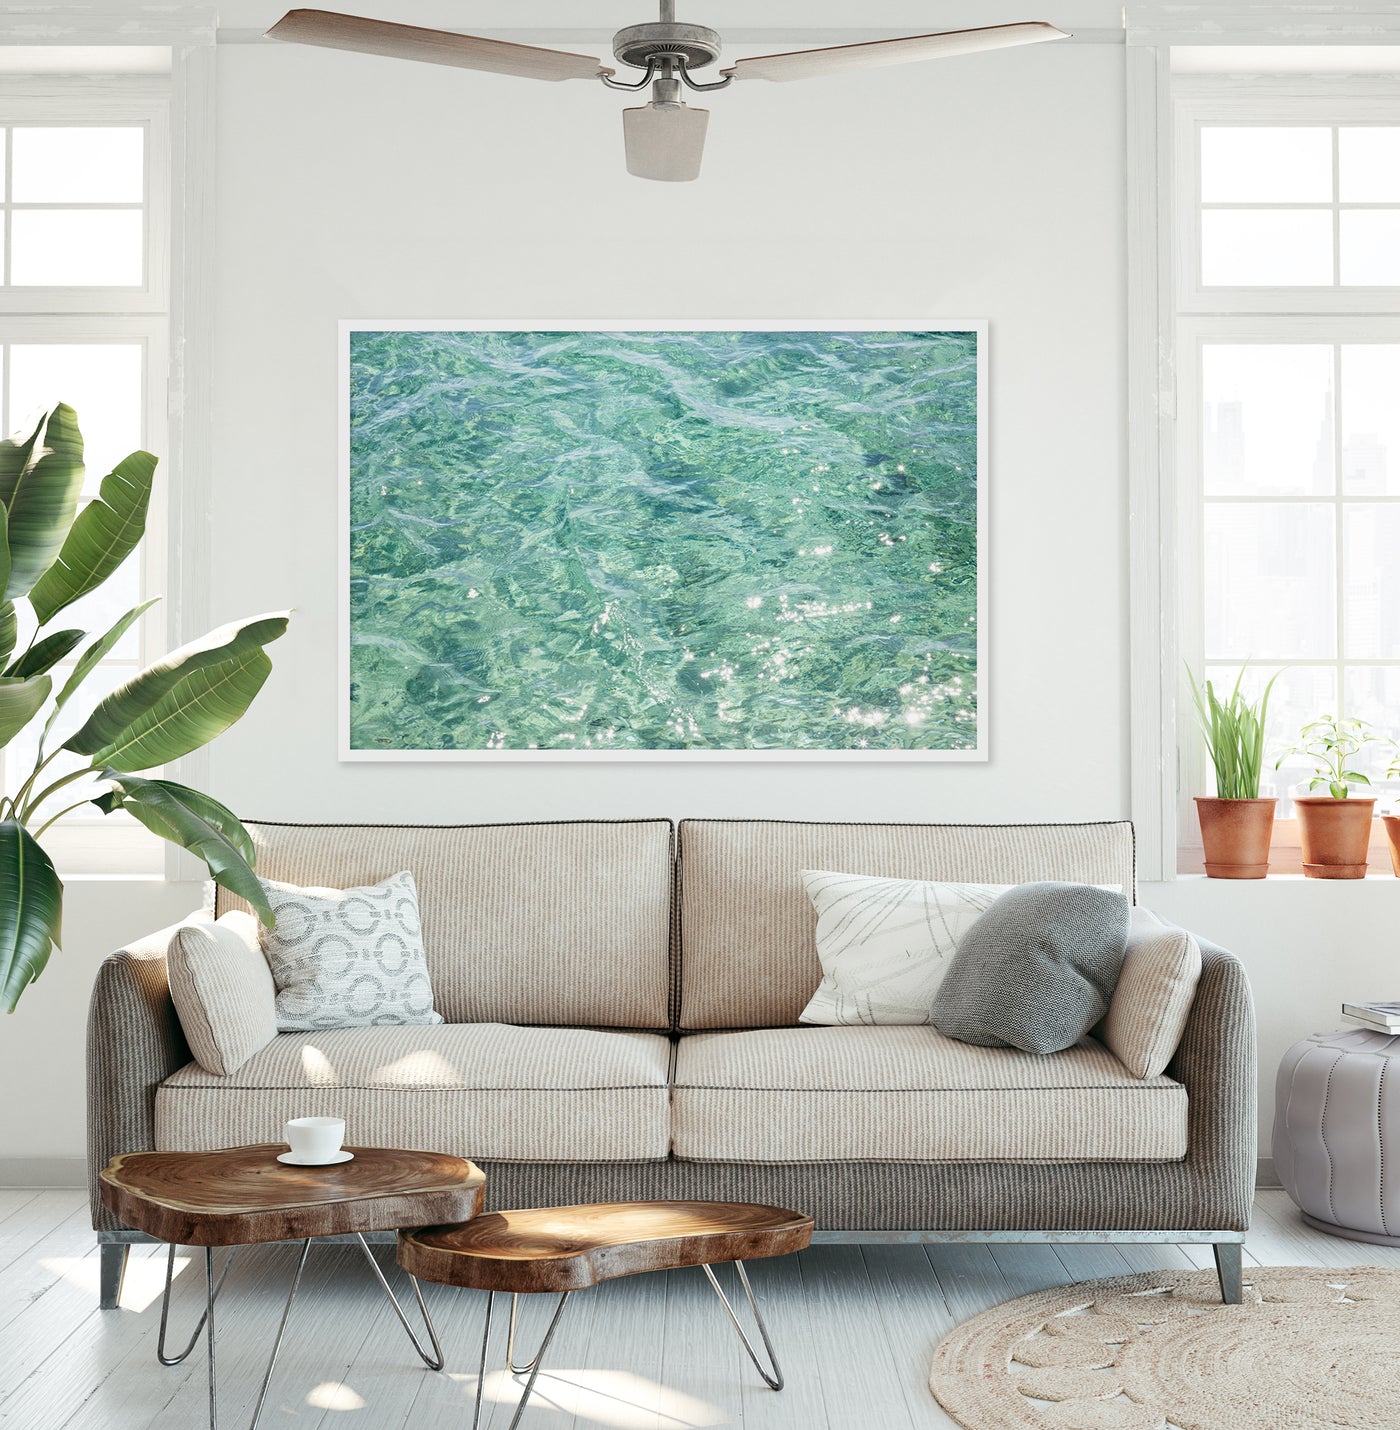 Abstract Water - Large green art print by Cattie Coyle Photography above couch in living room